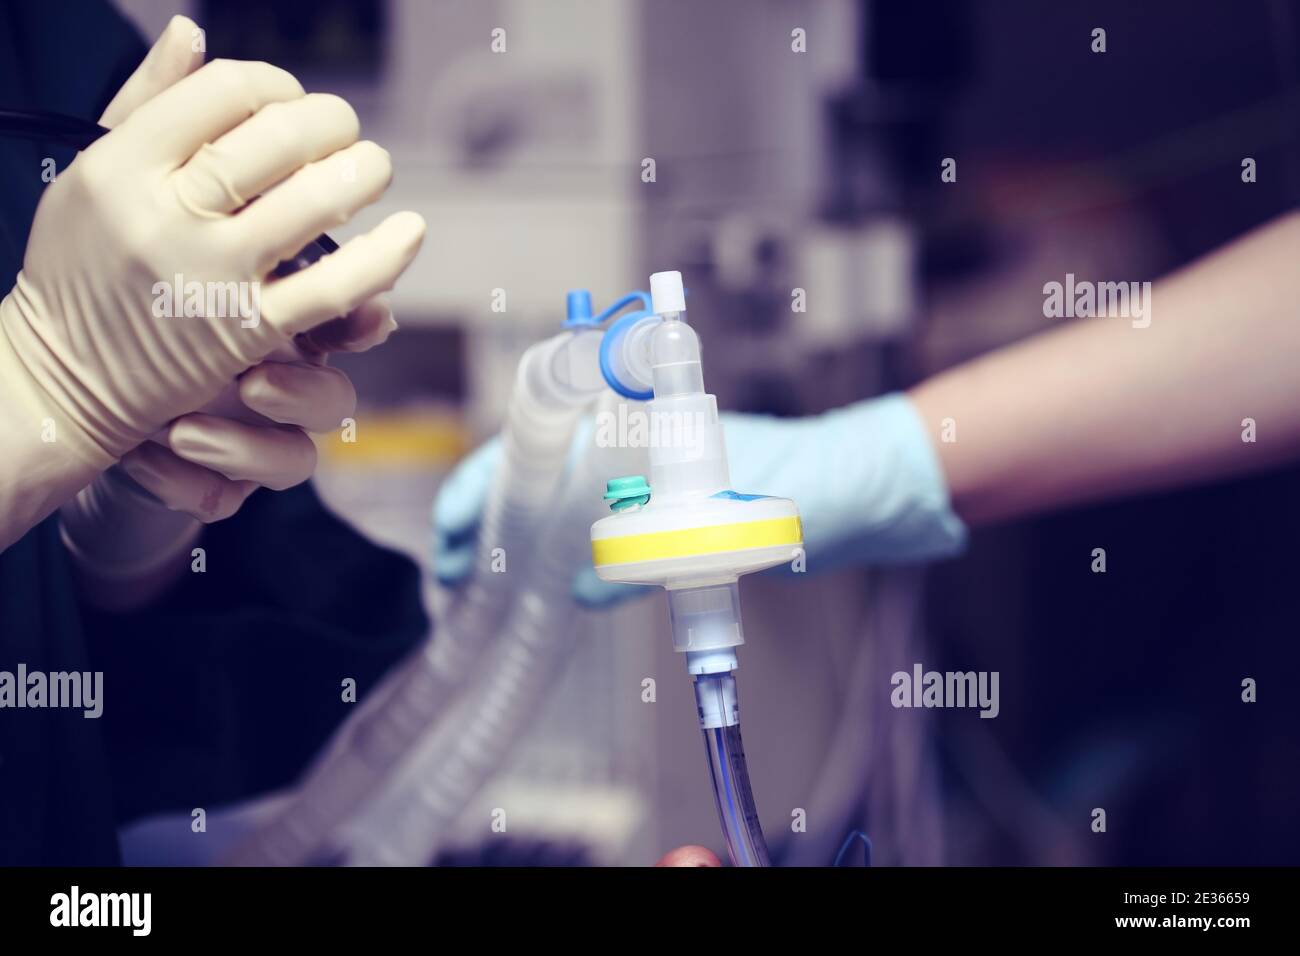 Work in the hospital's critical care unit. Stock Photo